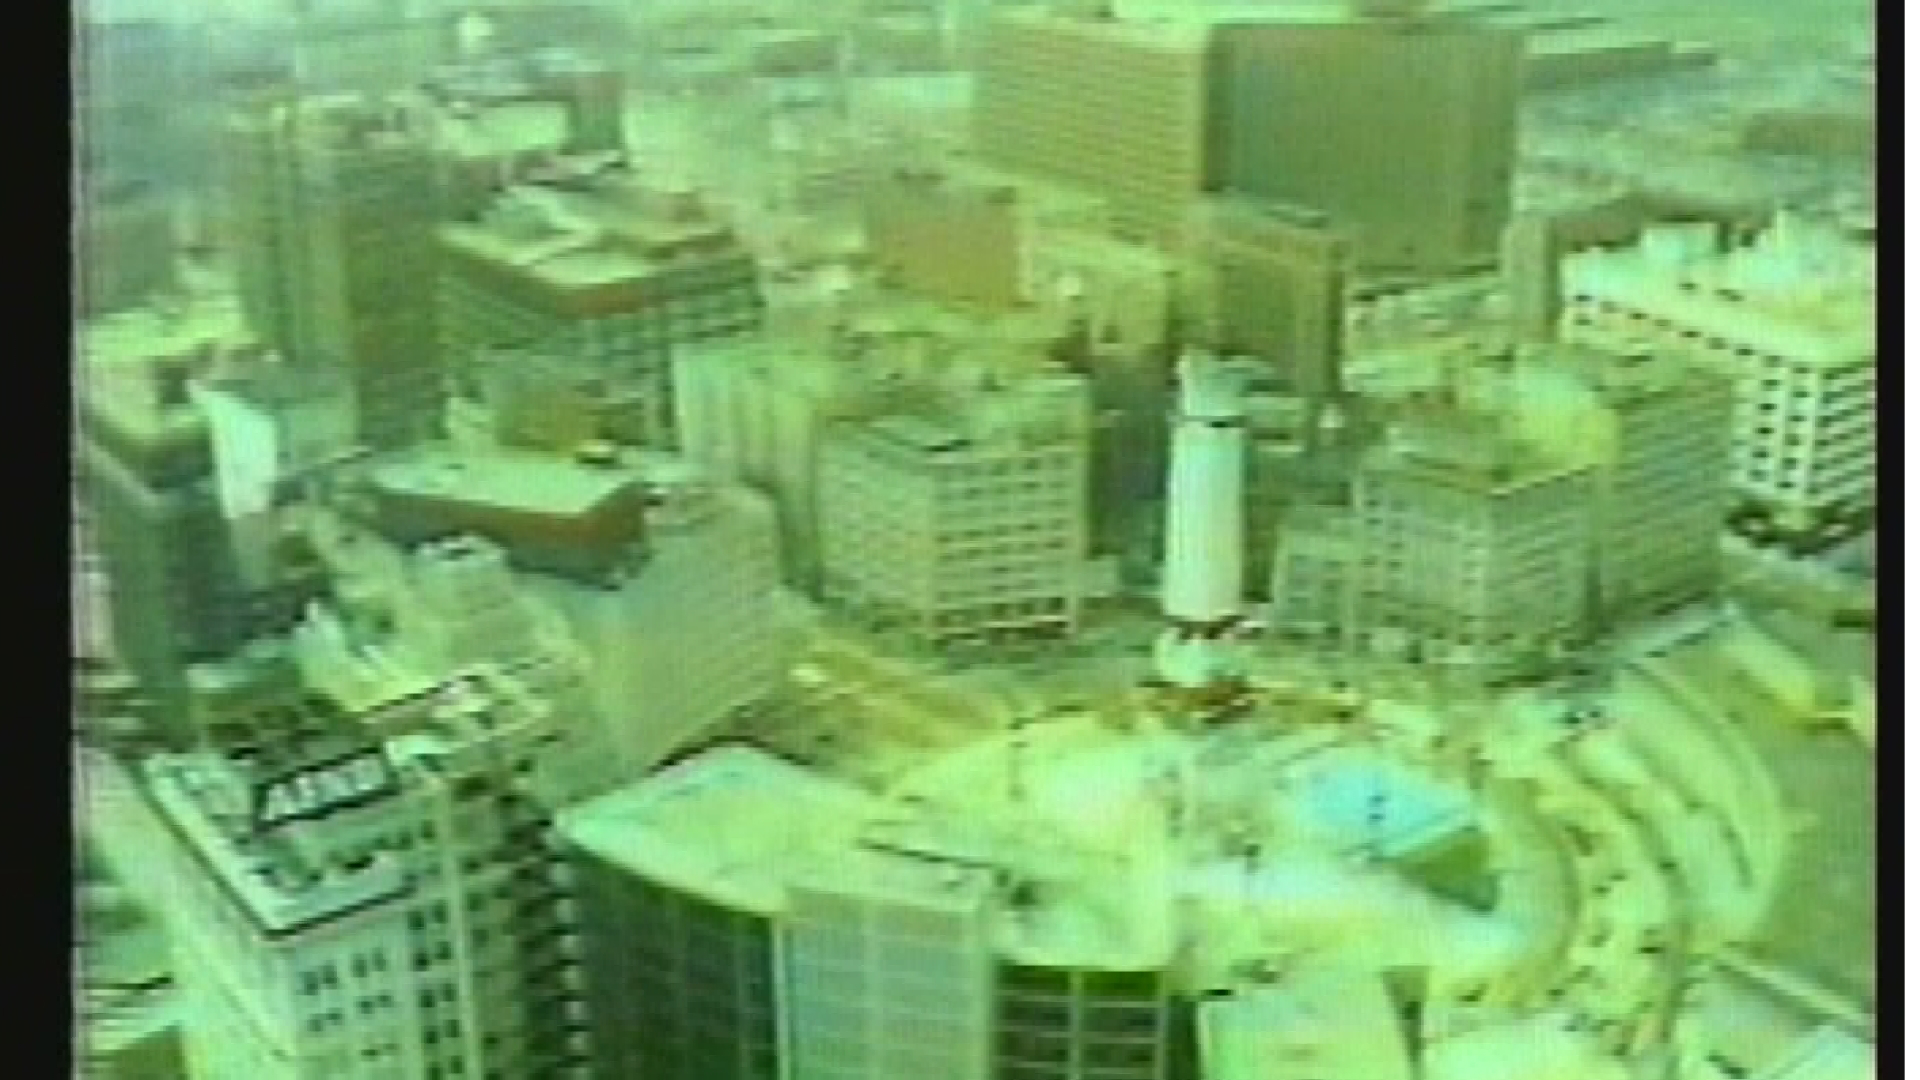 Reflections of a City is our 1973 documentary on Indianapolis: the history and future predictions from city officials and residents at the time.